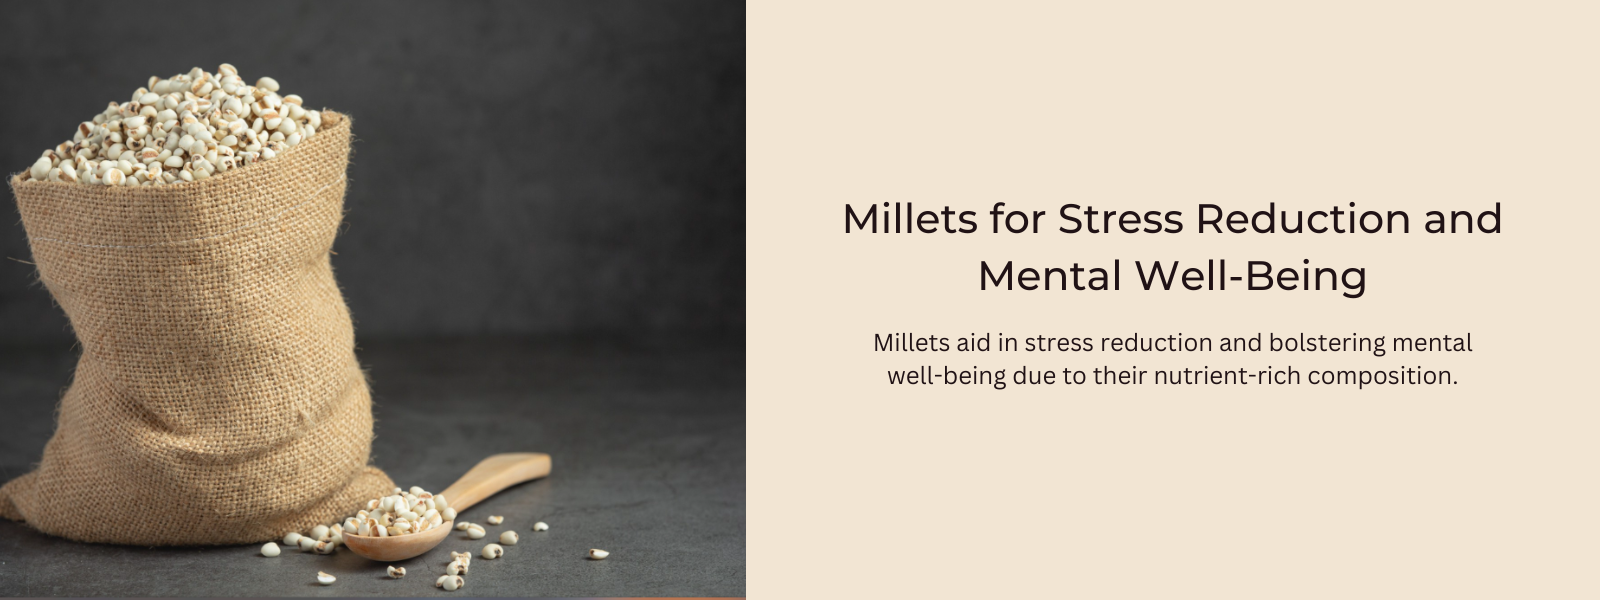 Millets for Stress Reduction and Mental Well-Being